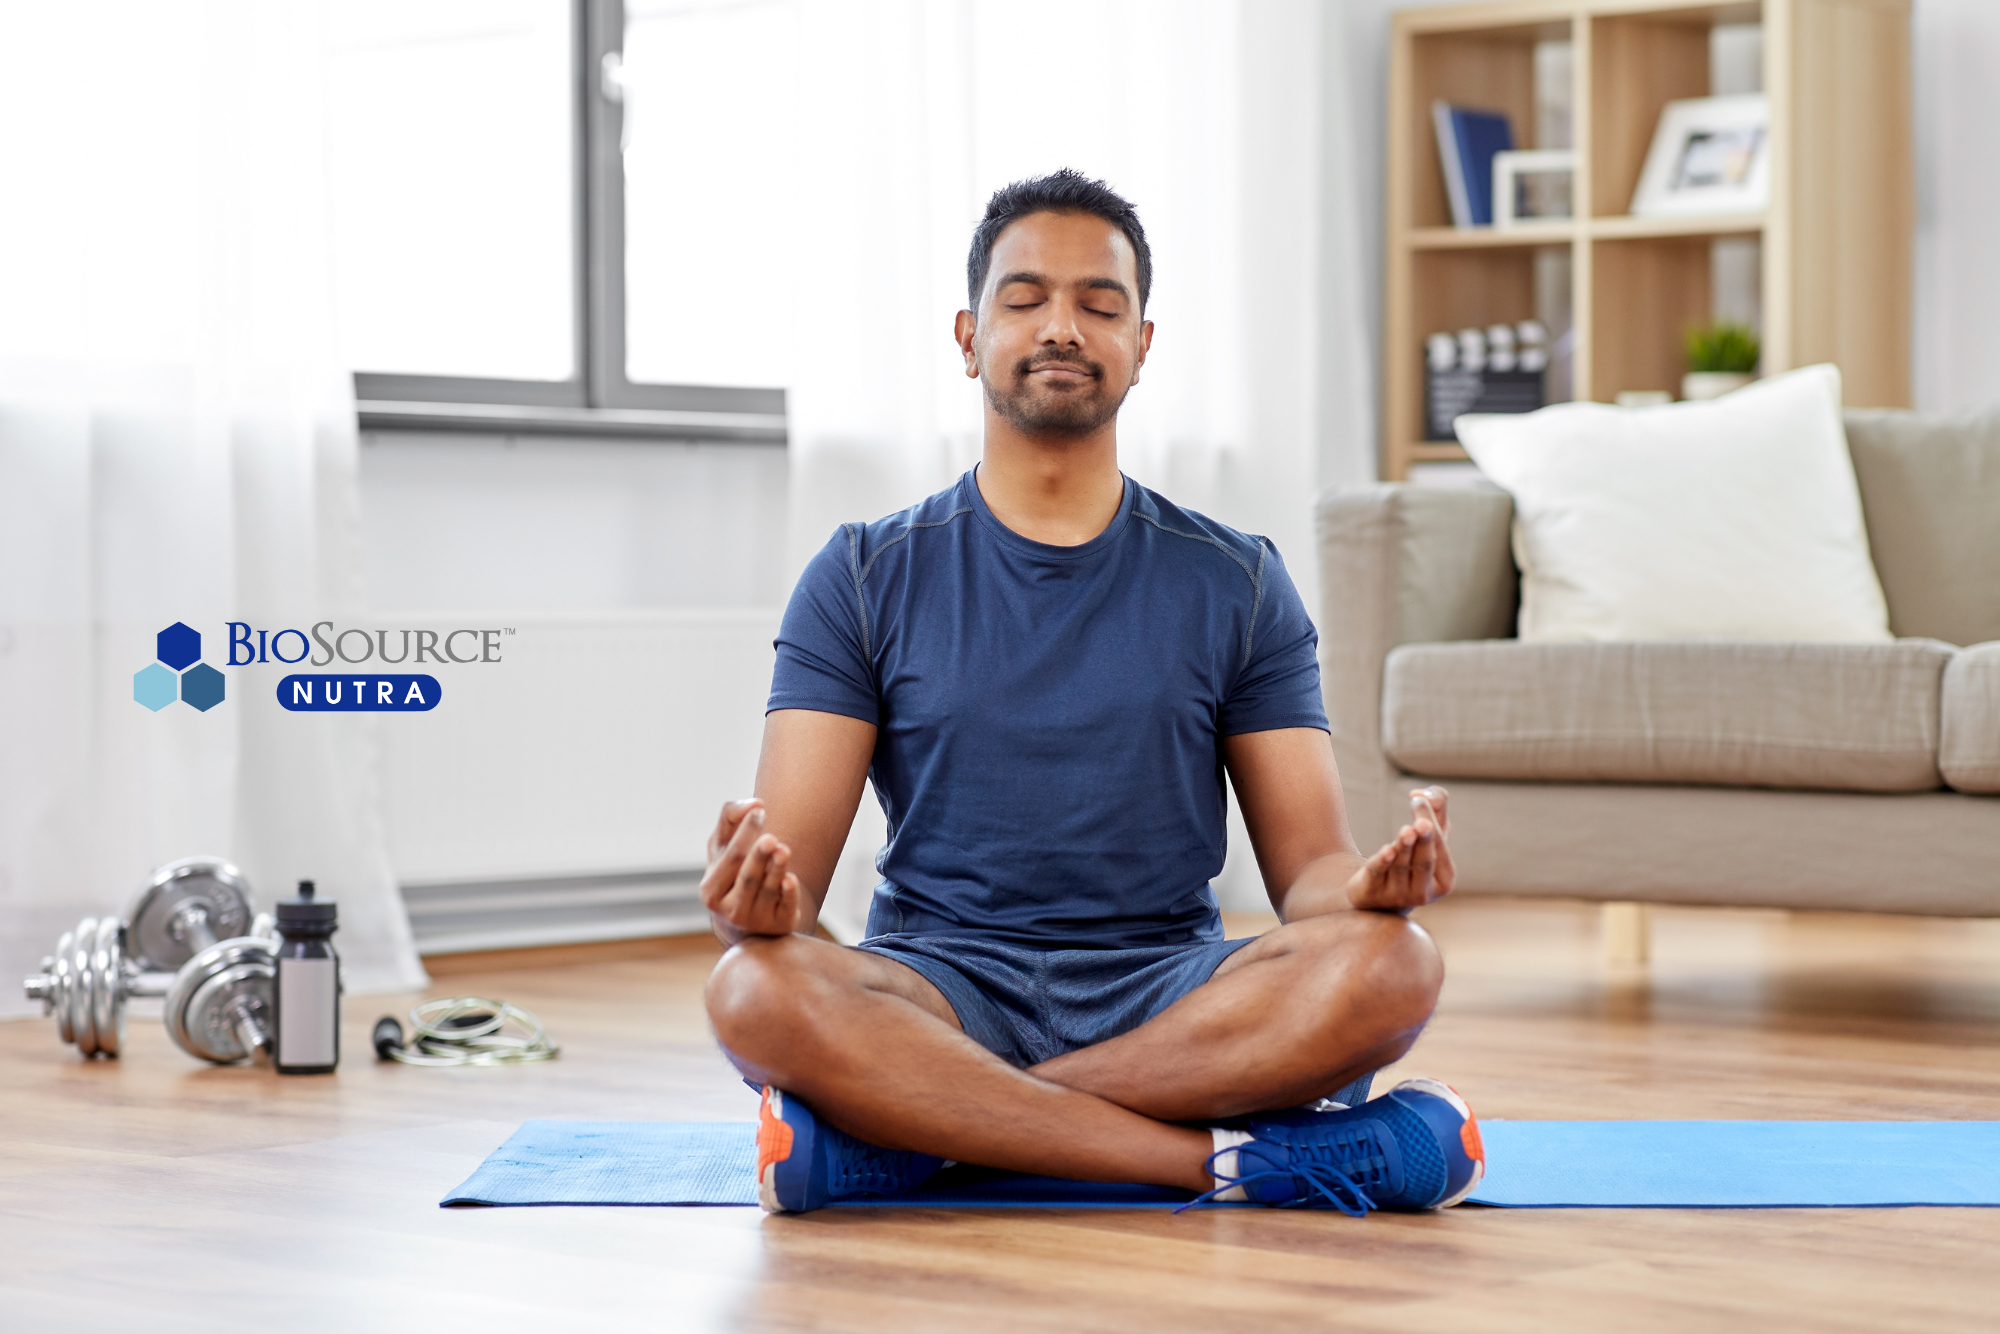 A young man sits on a yoga mat with his legs crossed meditating